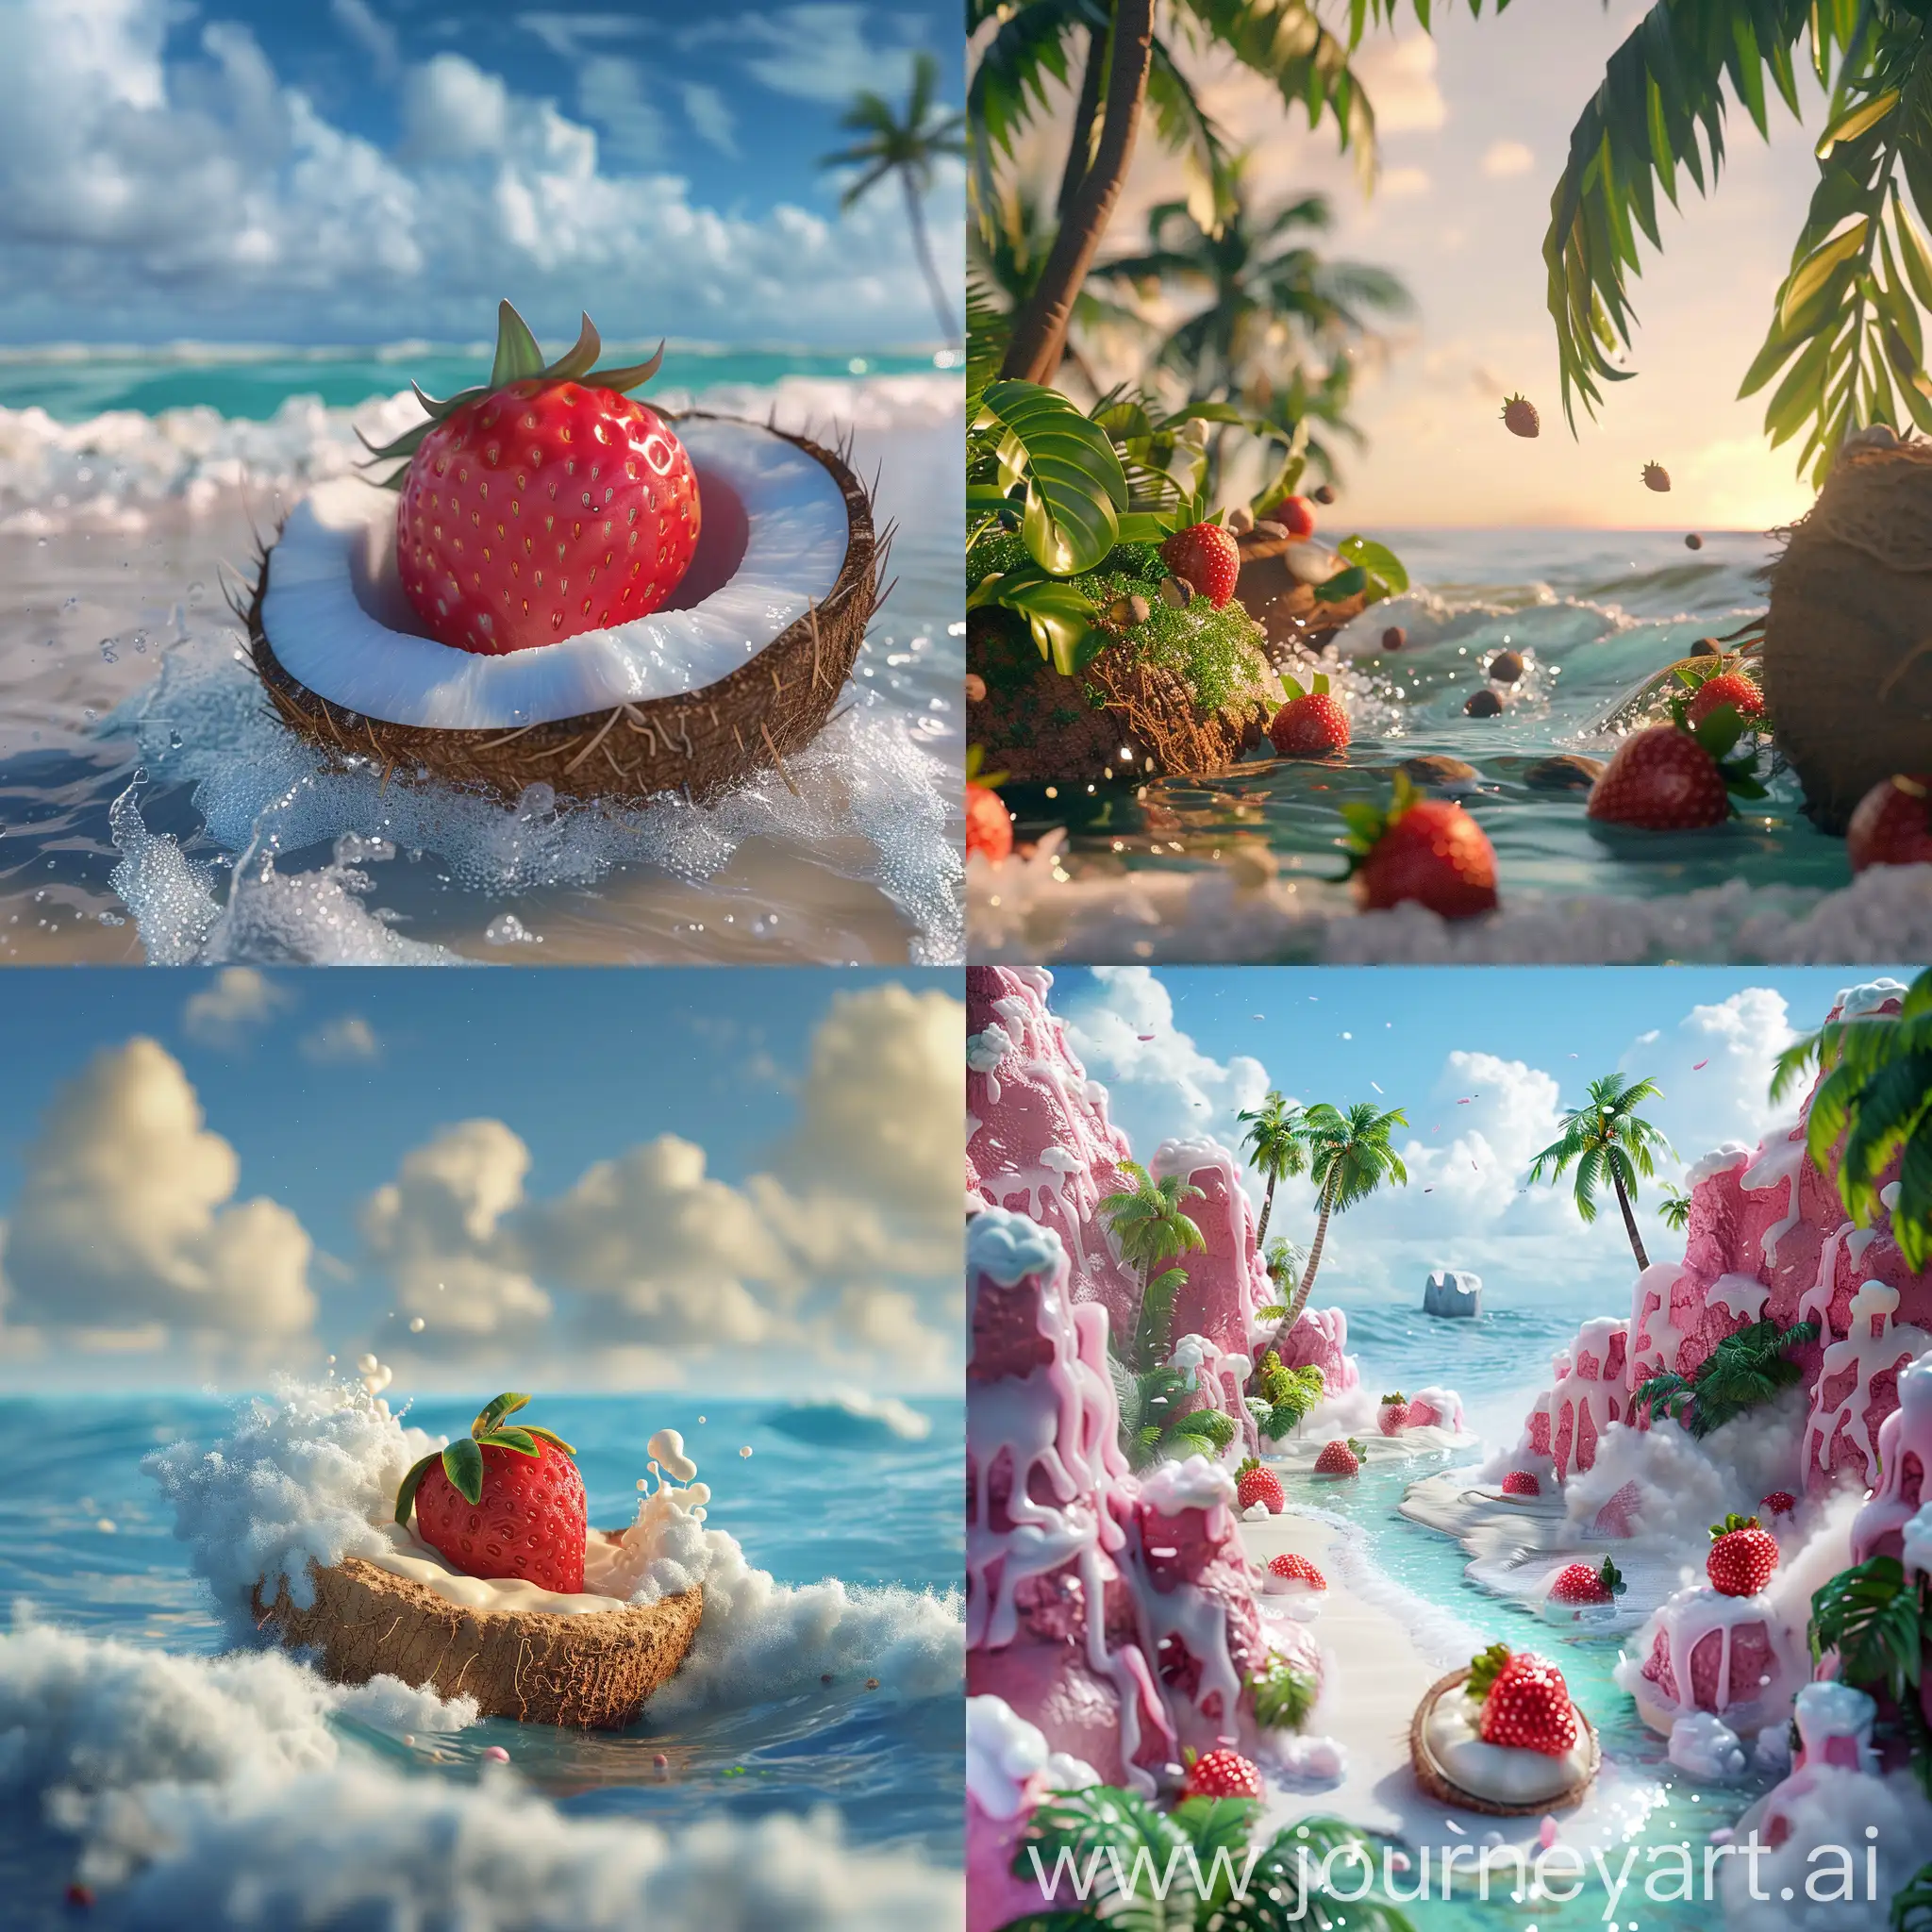 Coconut and strawberry on the ocean :: 3D animation